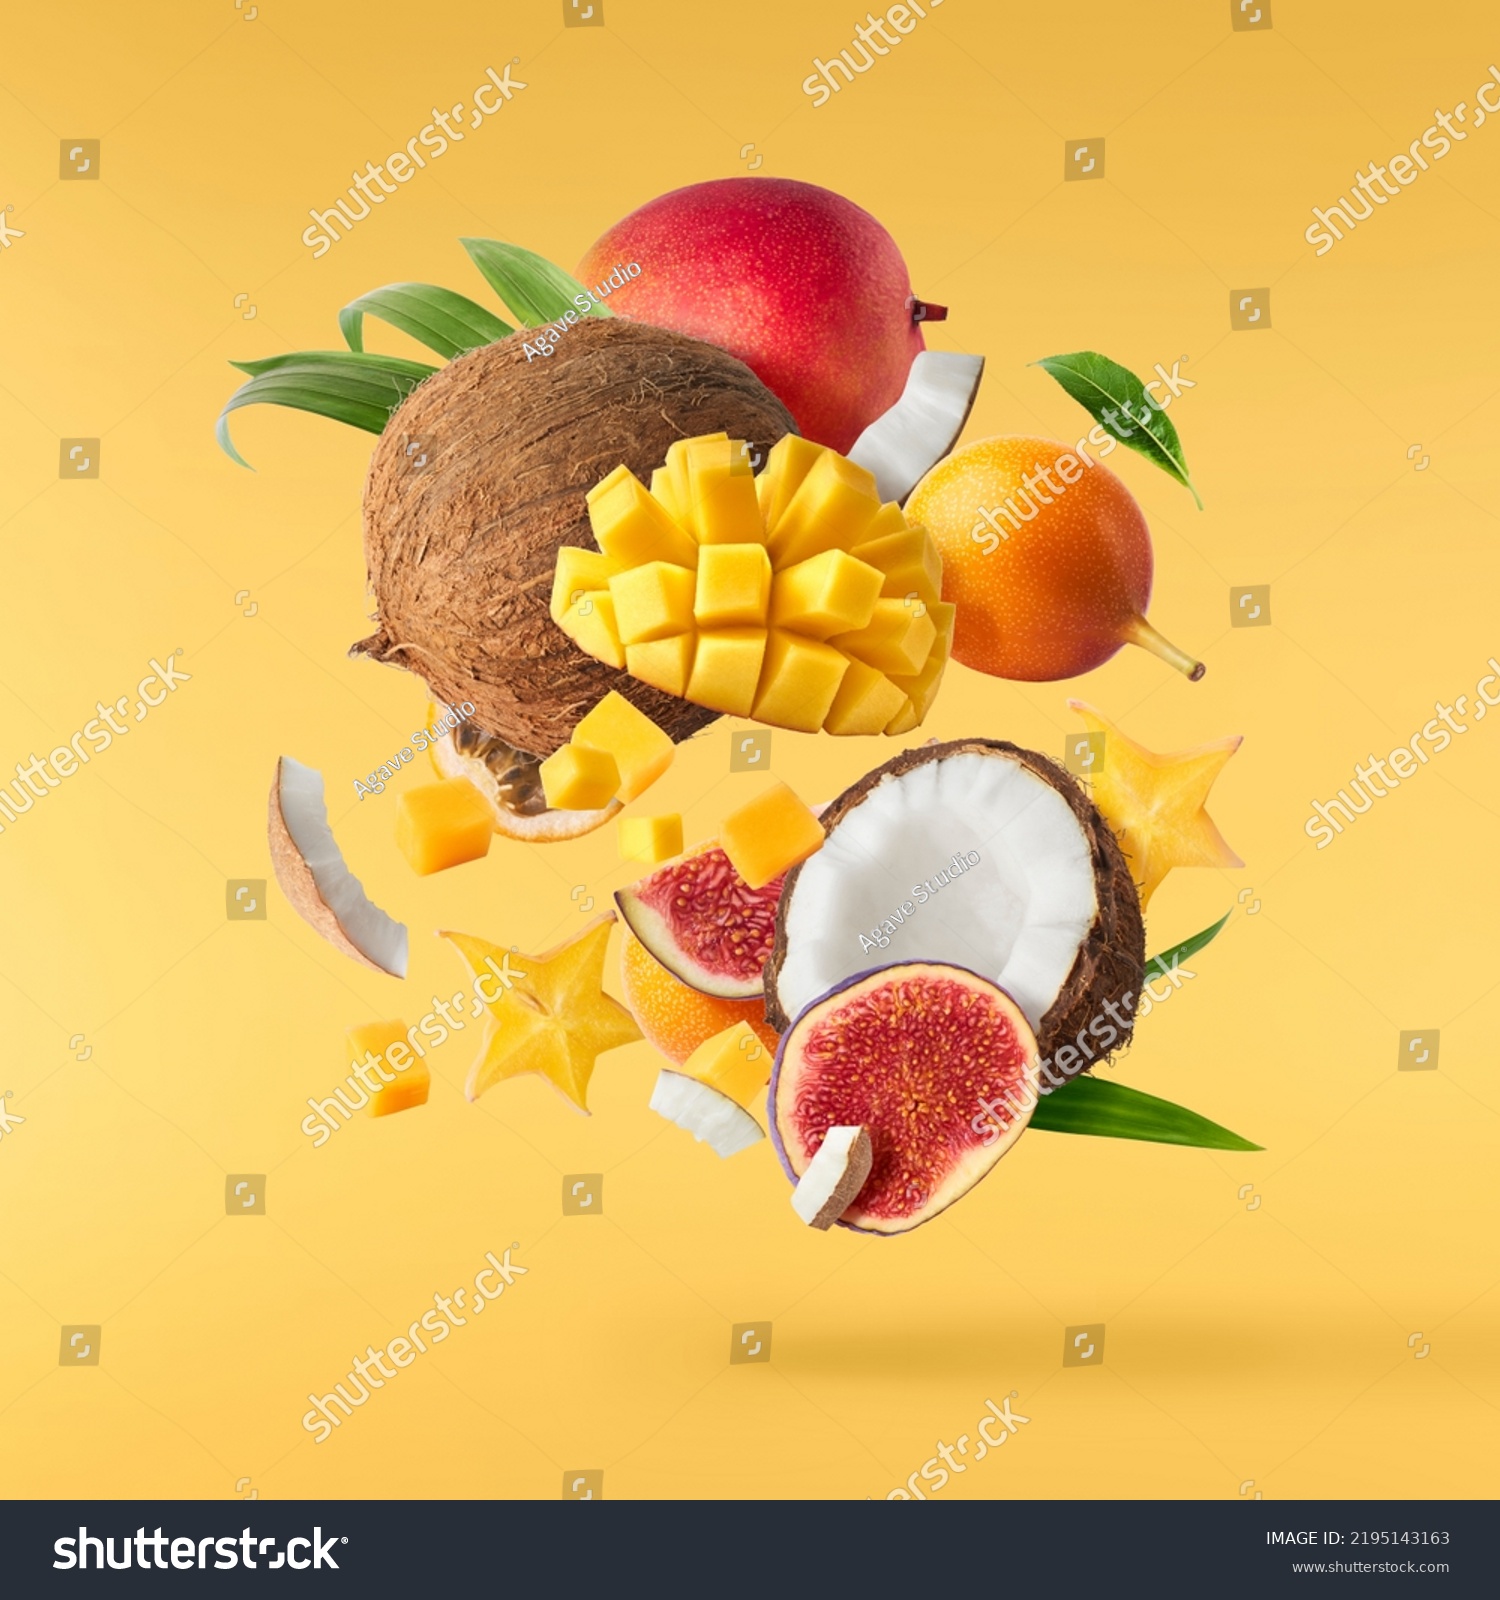 Exotic fruit mix, coconuts, mango, fig, passiflora, carambola falling in te air isolated on yellow background. Food levitation, zero gravity conception. High resolution image #2195143163